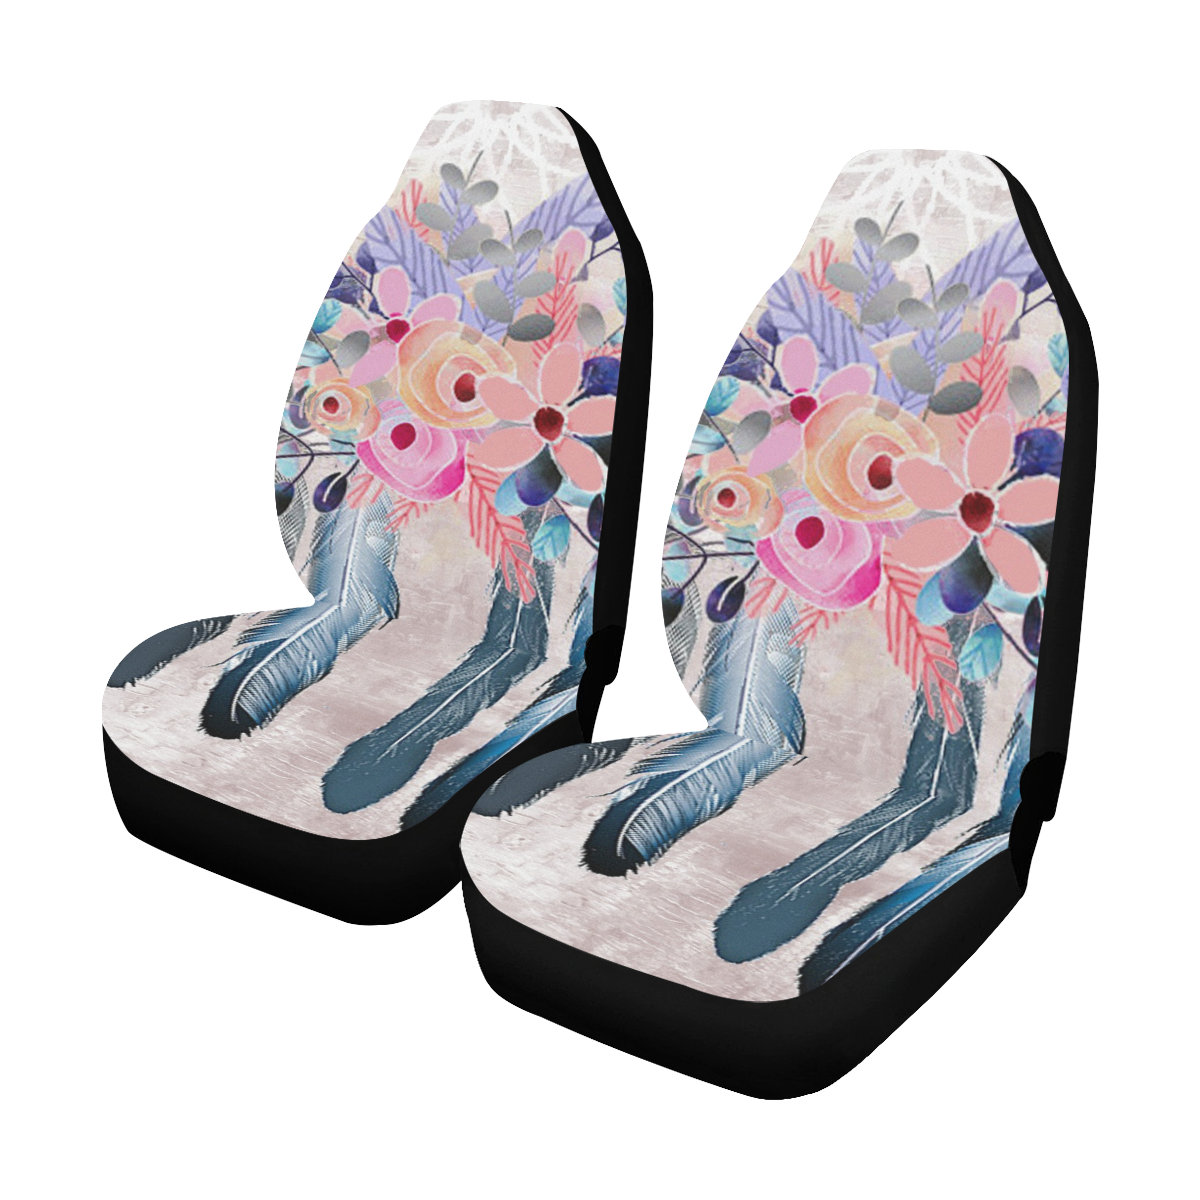 pink dreamcatcher floral Car Seat Covers (Set of 2)